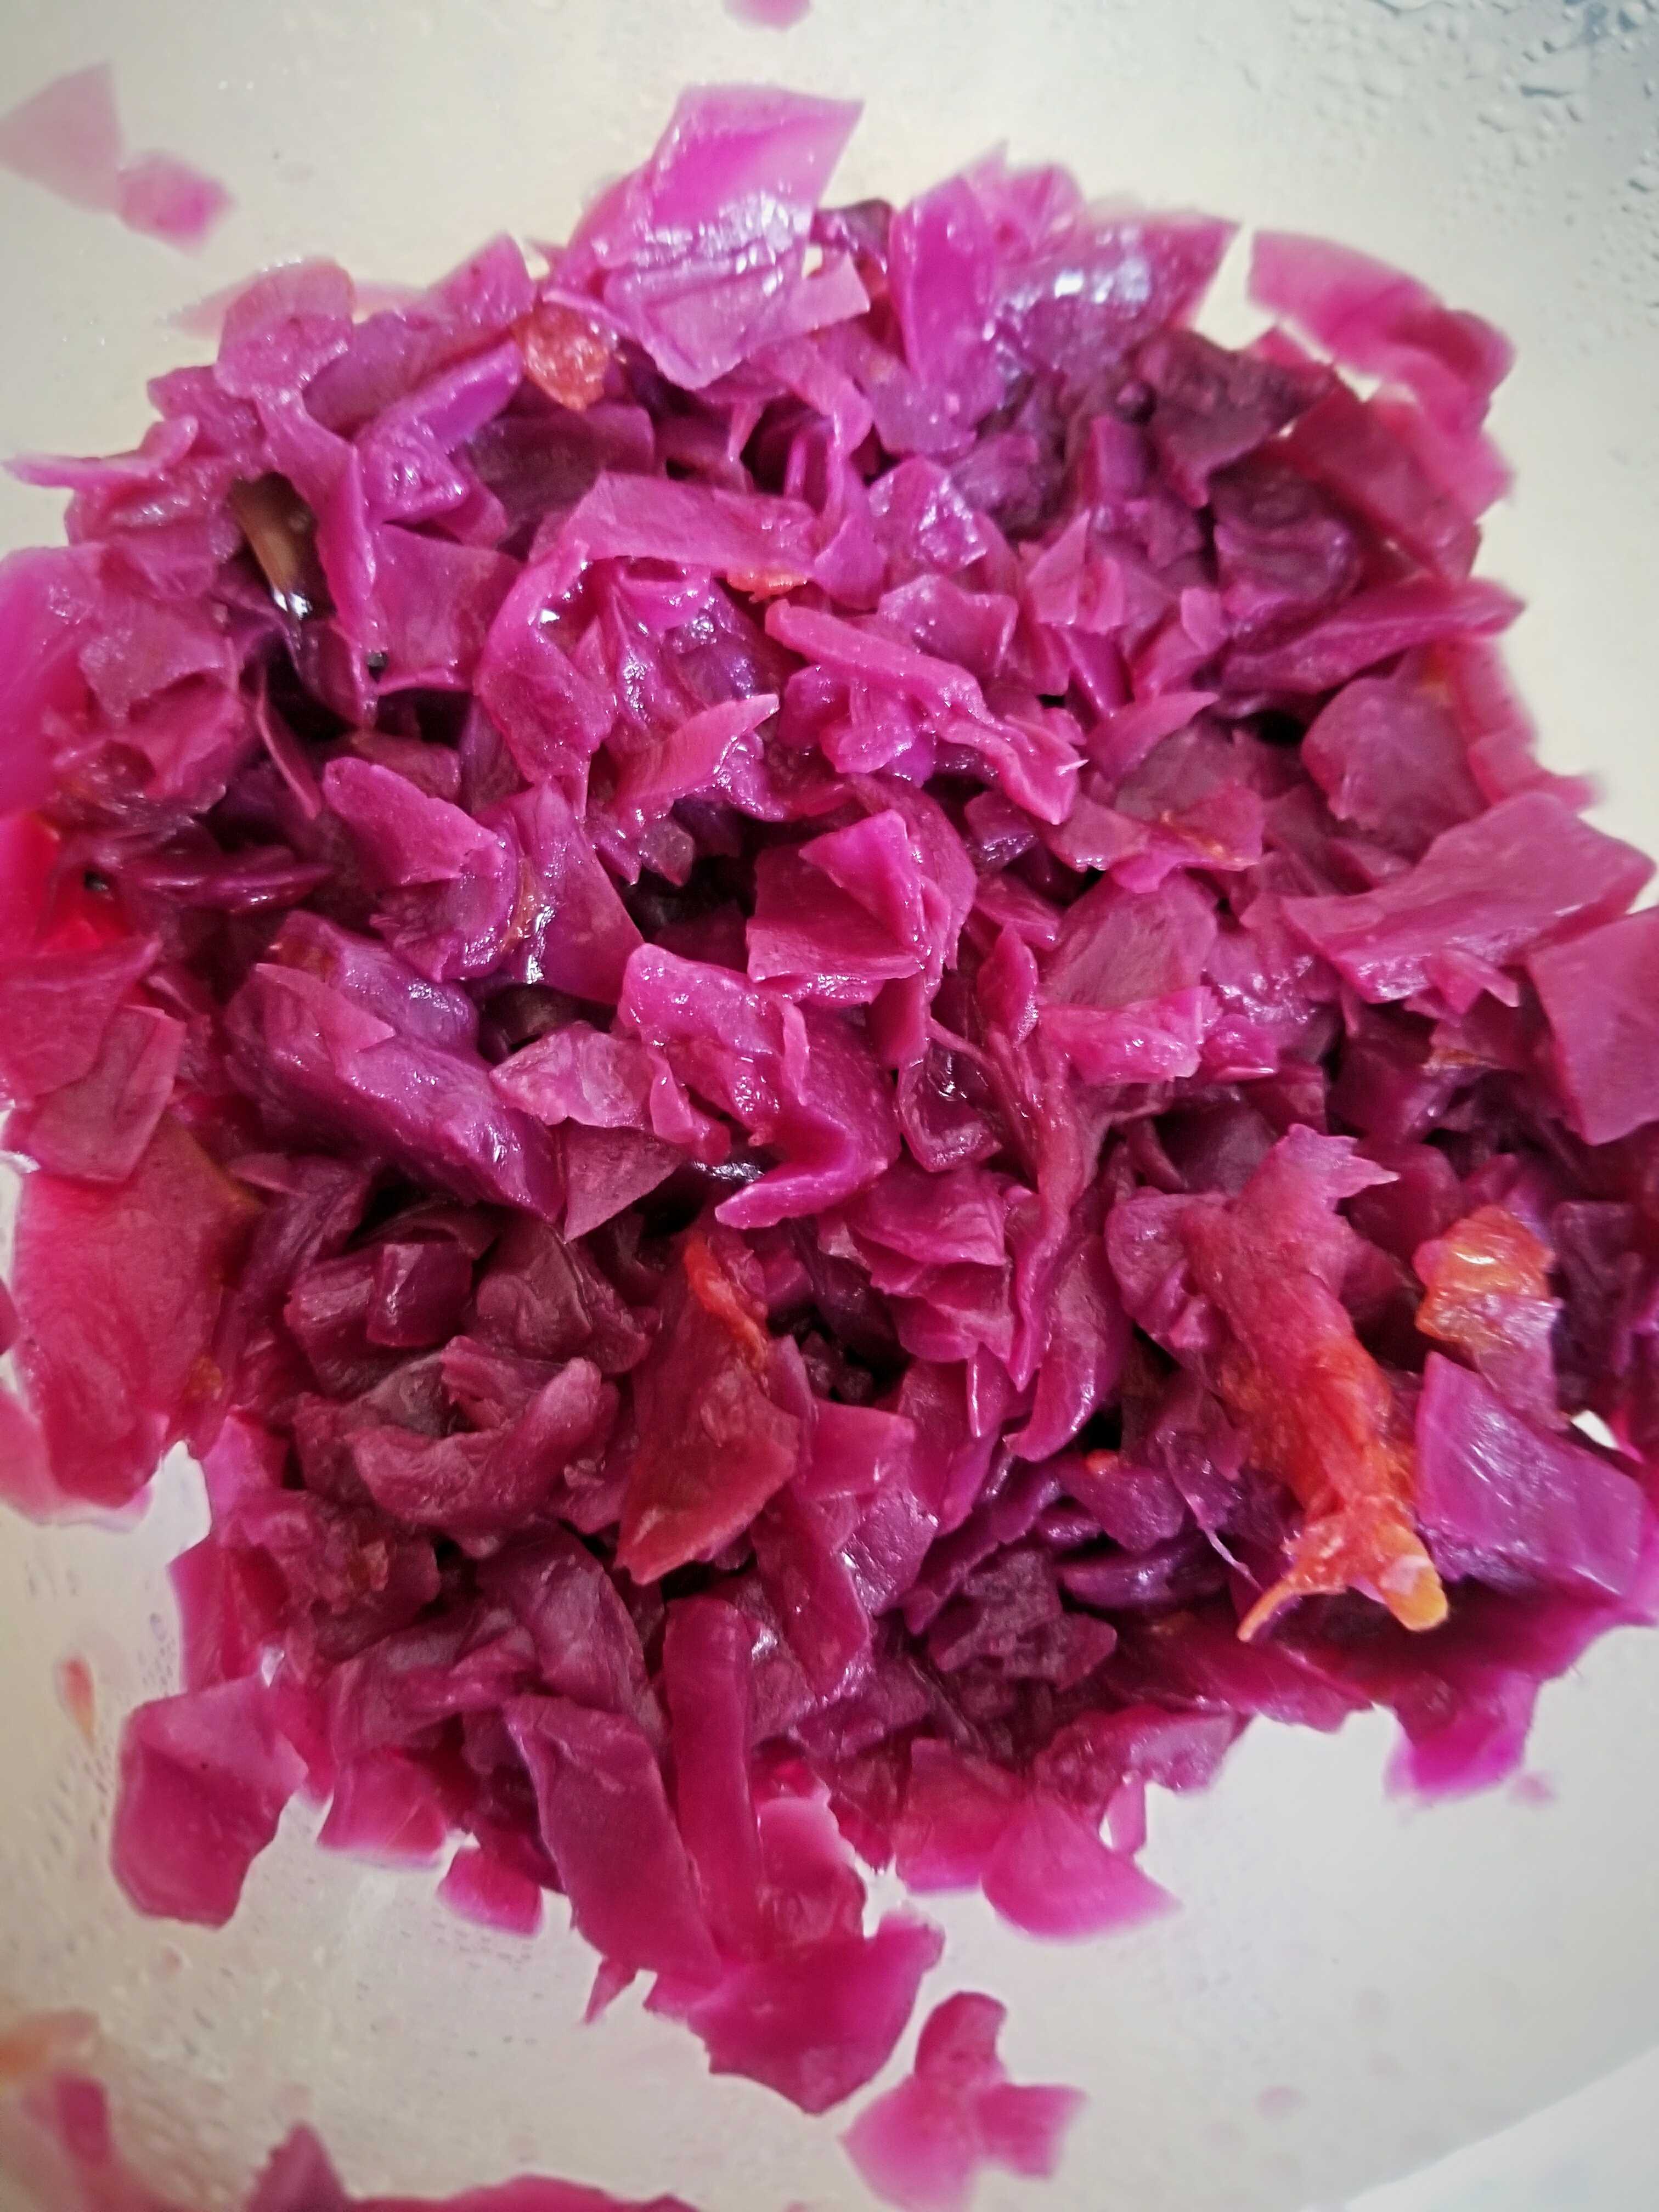 Braised Red Cabbage with Apples image